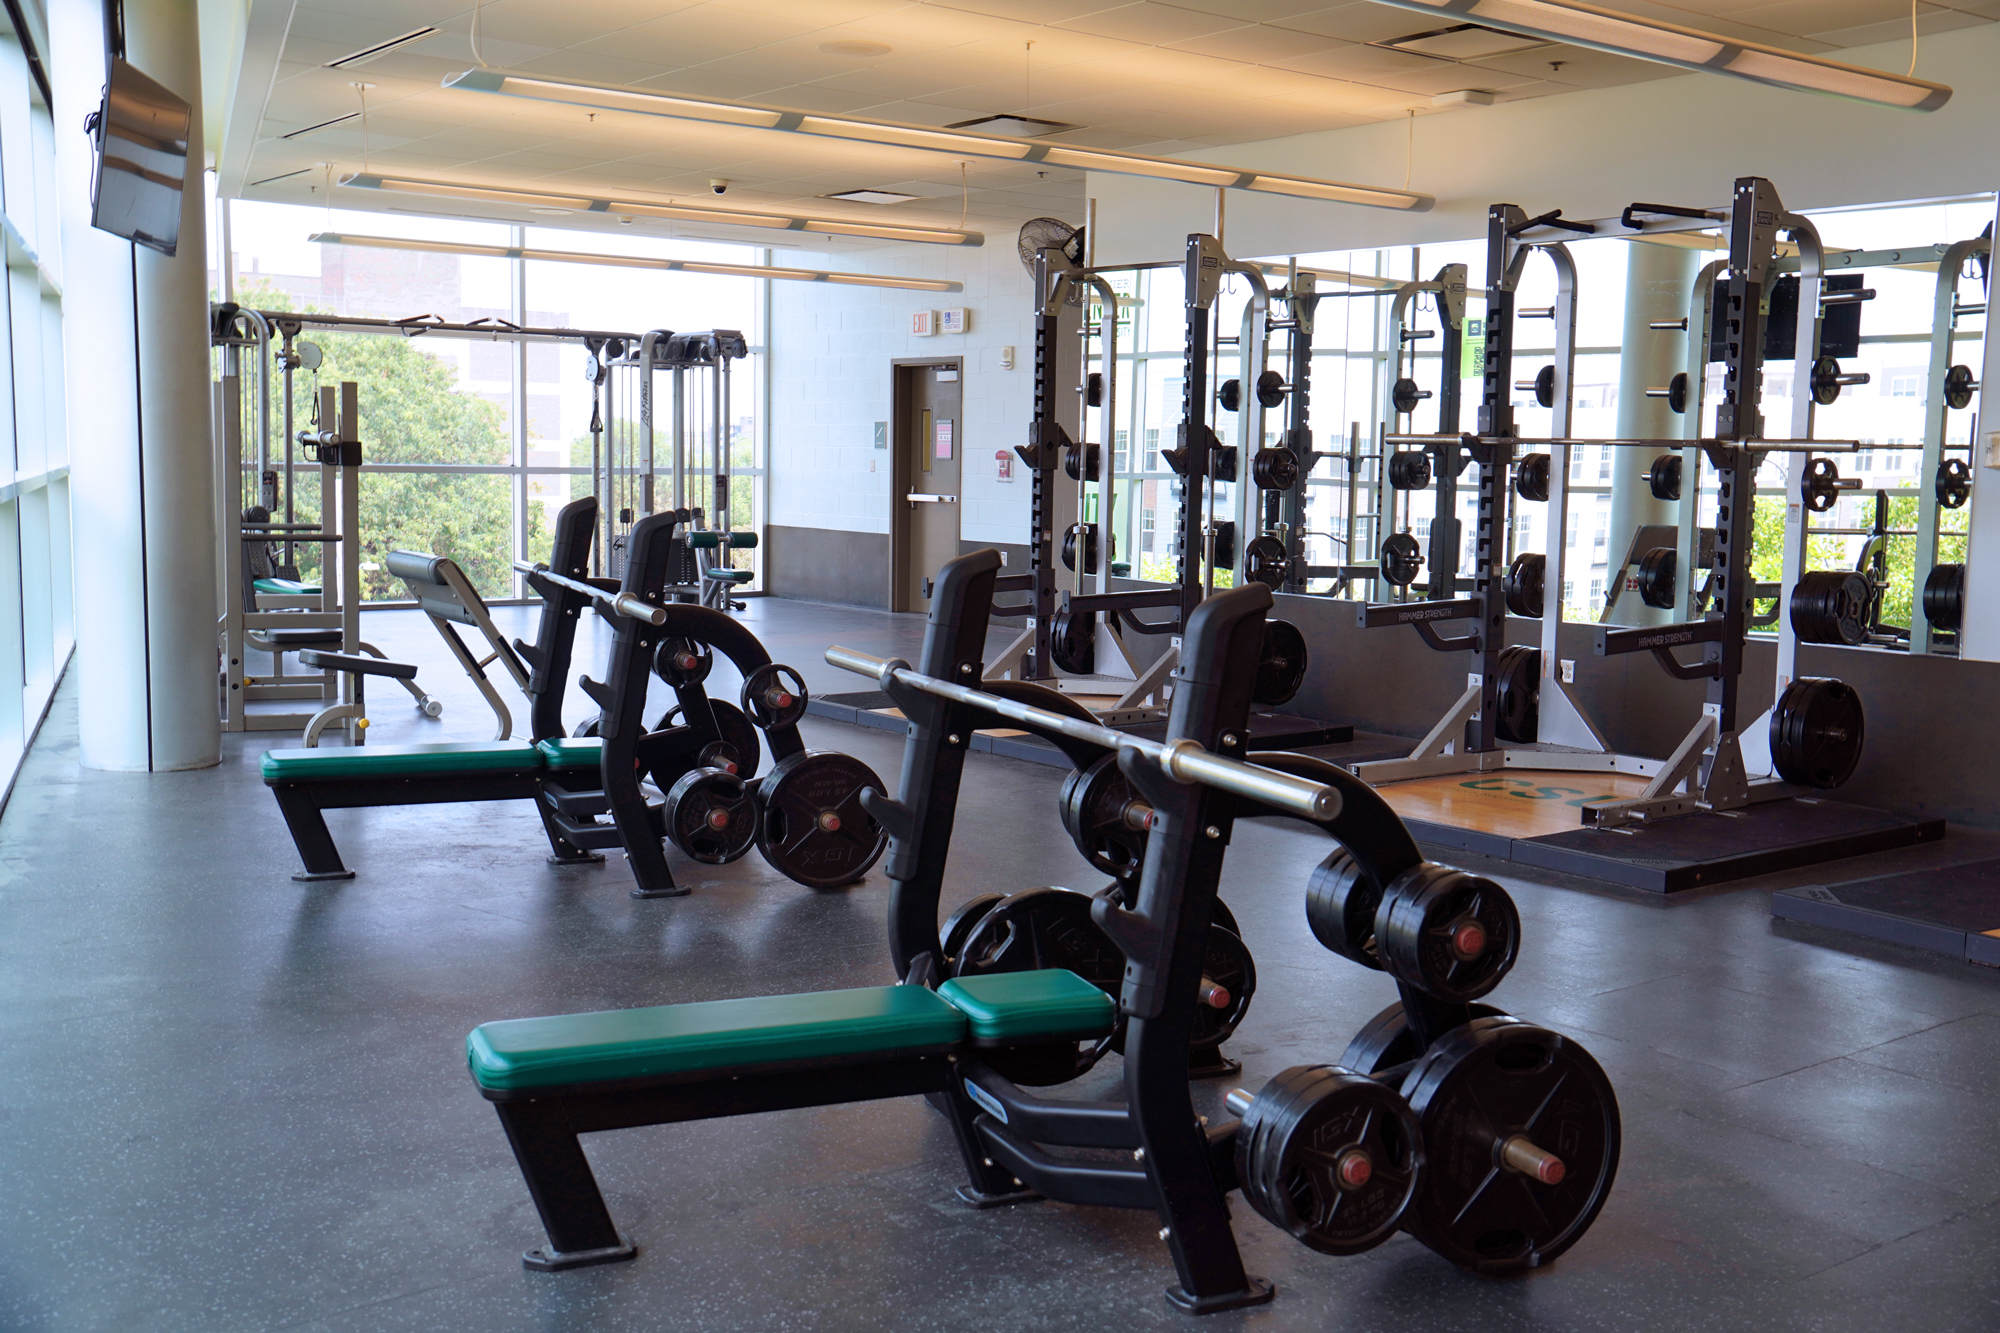 weight room with benches and squat racks